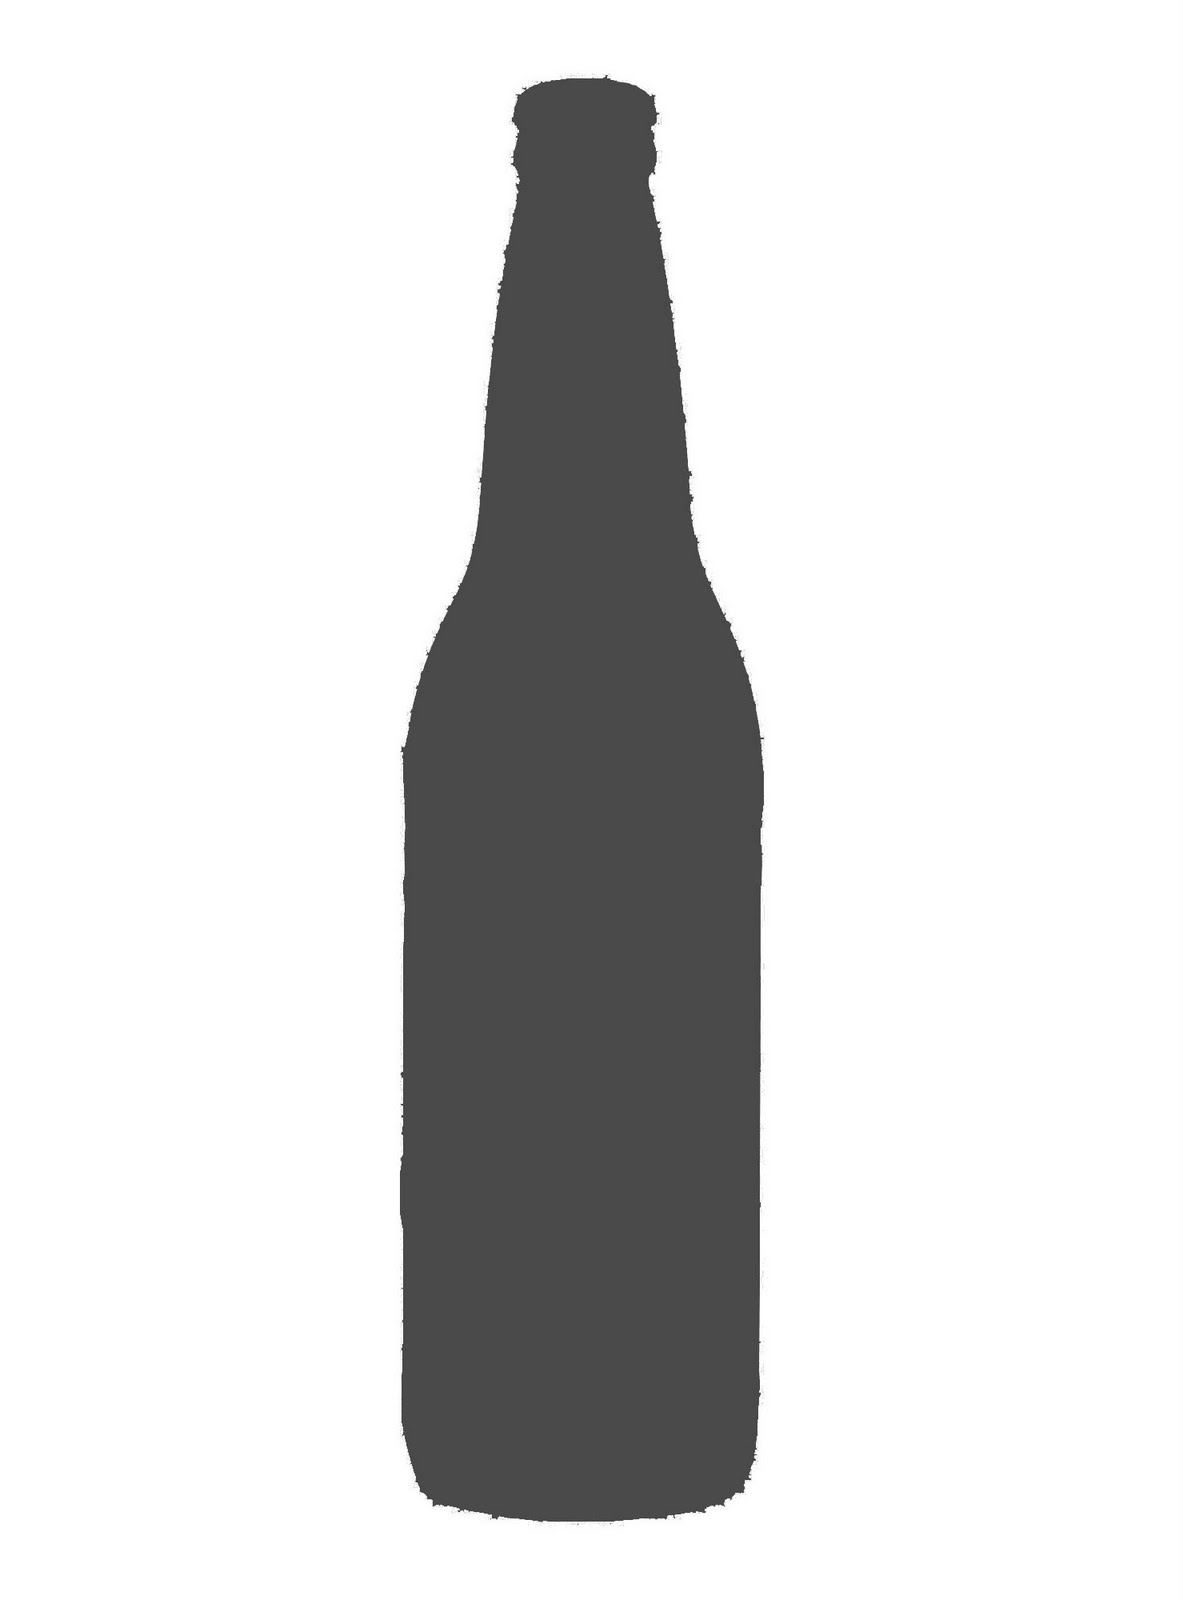 Beer Bottle Illustration - Viewing Gallery